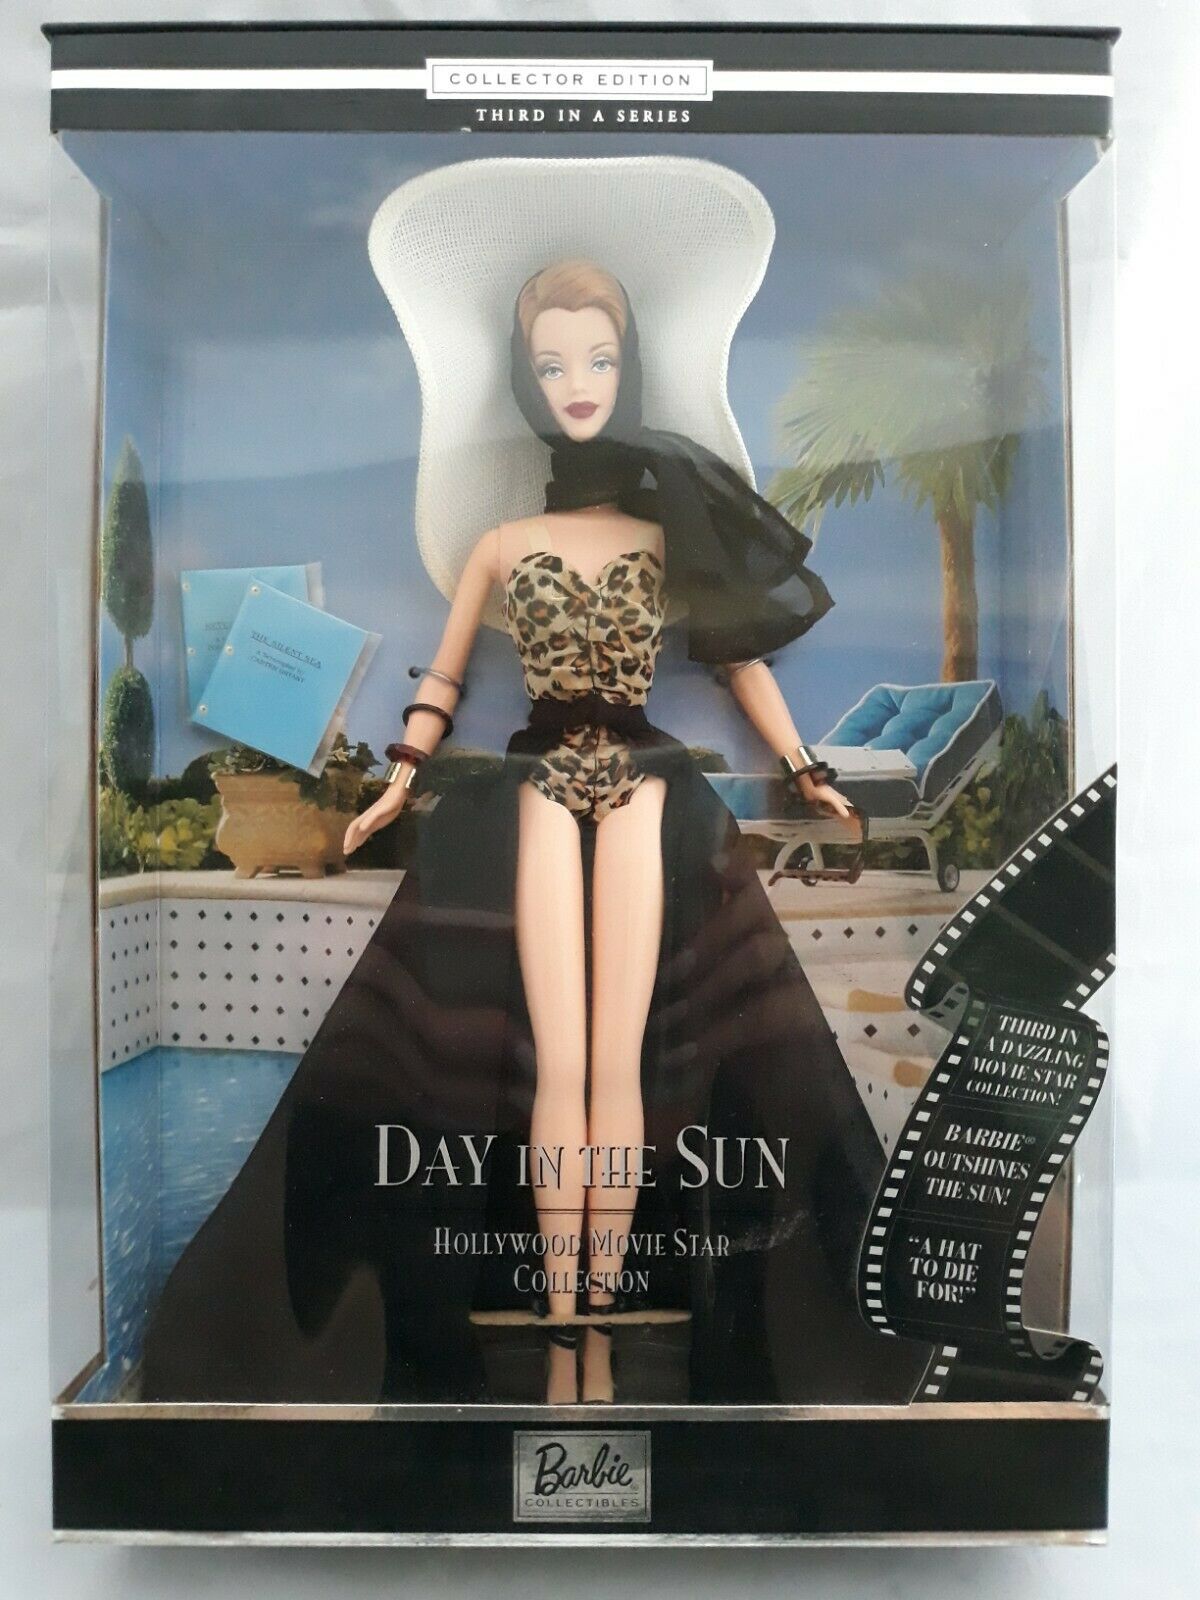 Day In The Sun Barbie Nrfb 2000 Hollywood Movie Star Collection #26925